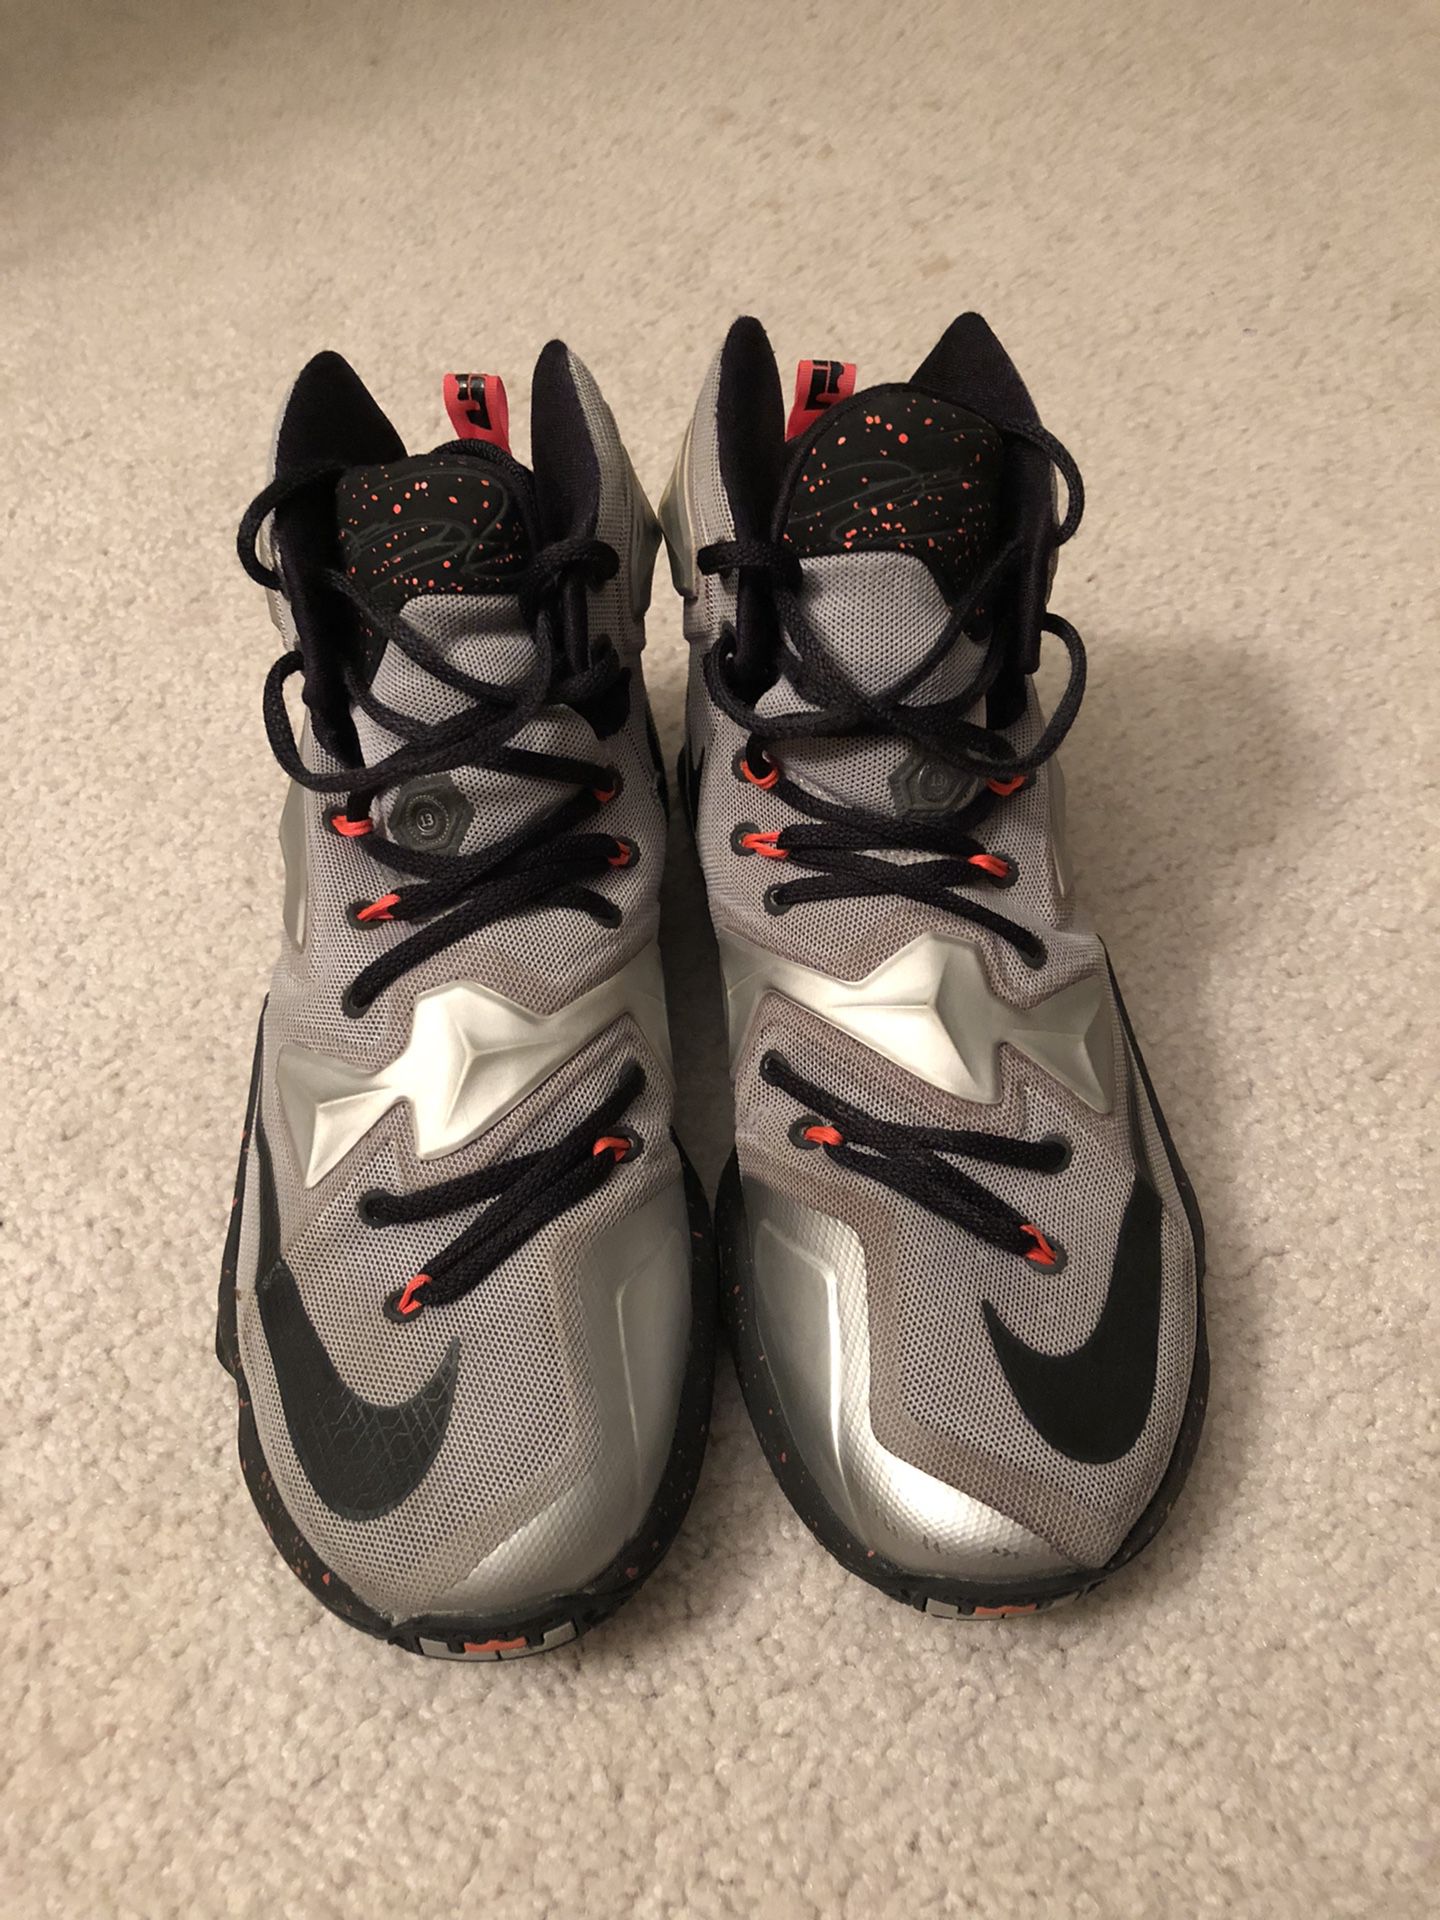 Lebron James Lebron 13 Lava Athletic Basketball Shoes - Great Condition